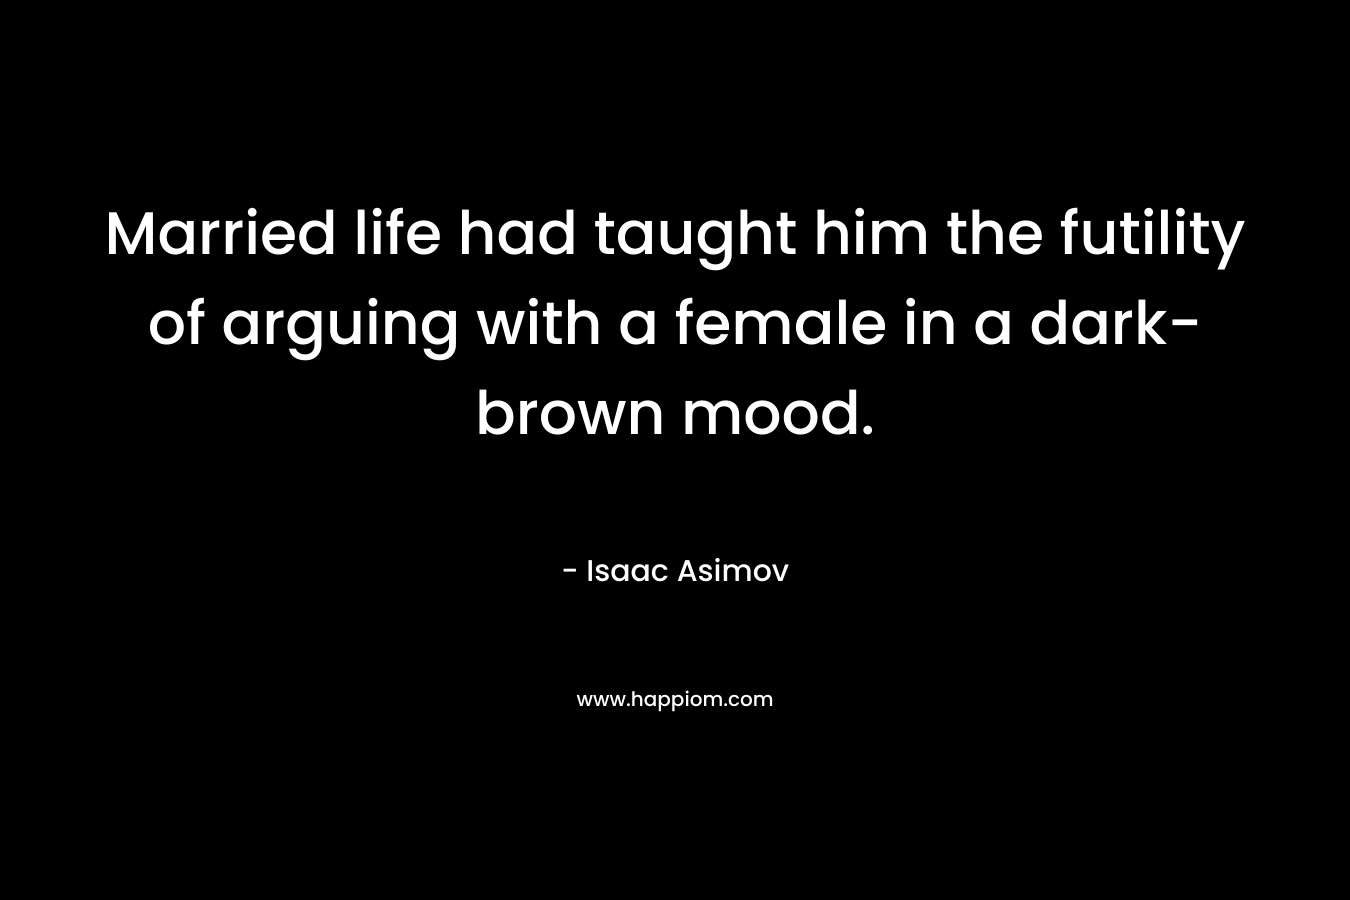 Married life had taught him the futility of arguing with a female in a dark-brown mood. – Isaac Asimov